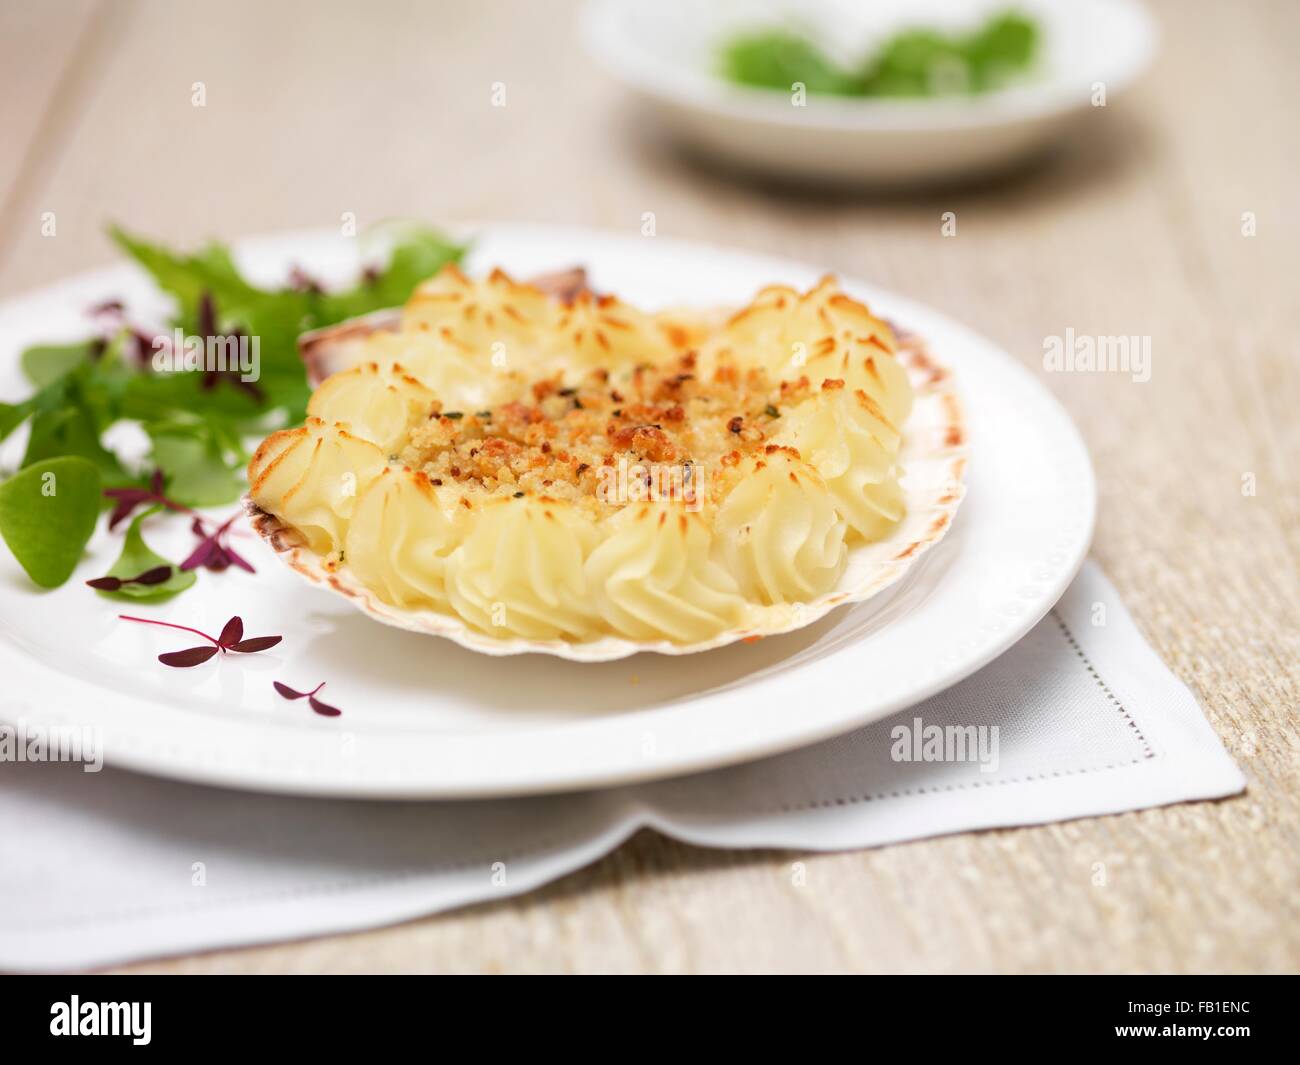 Coquille st jacques, scallops, potatoes and green salad leaves Stock Photo